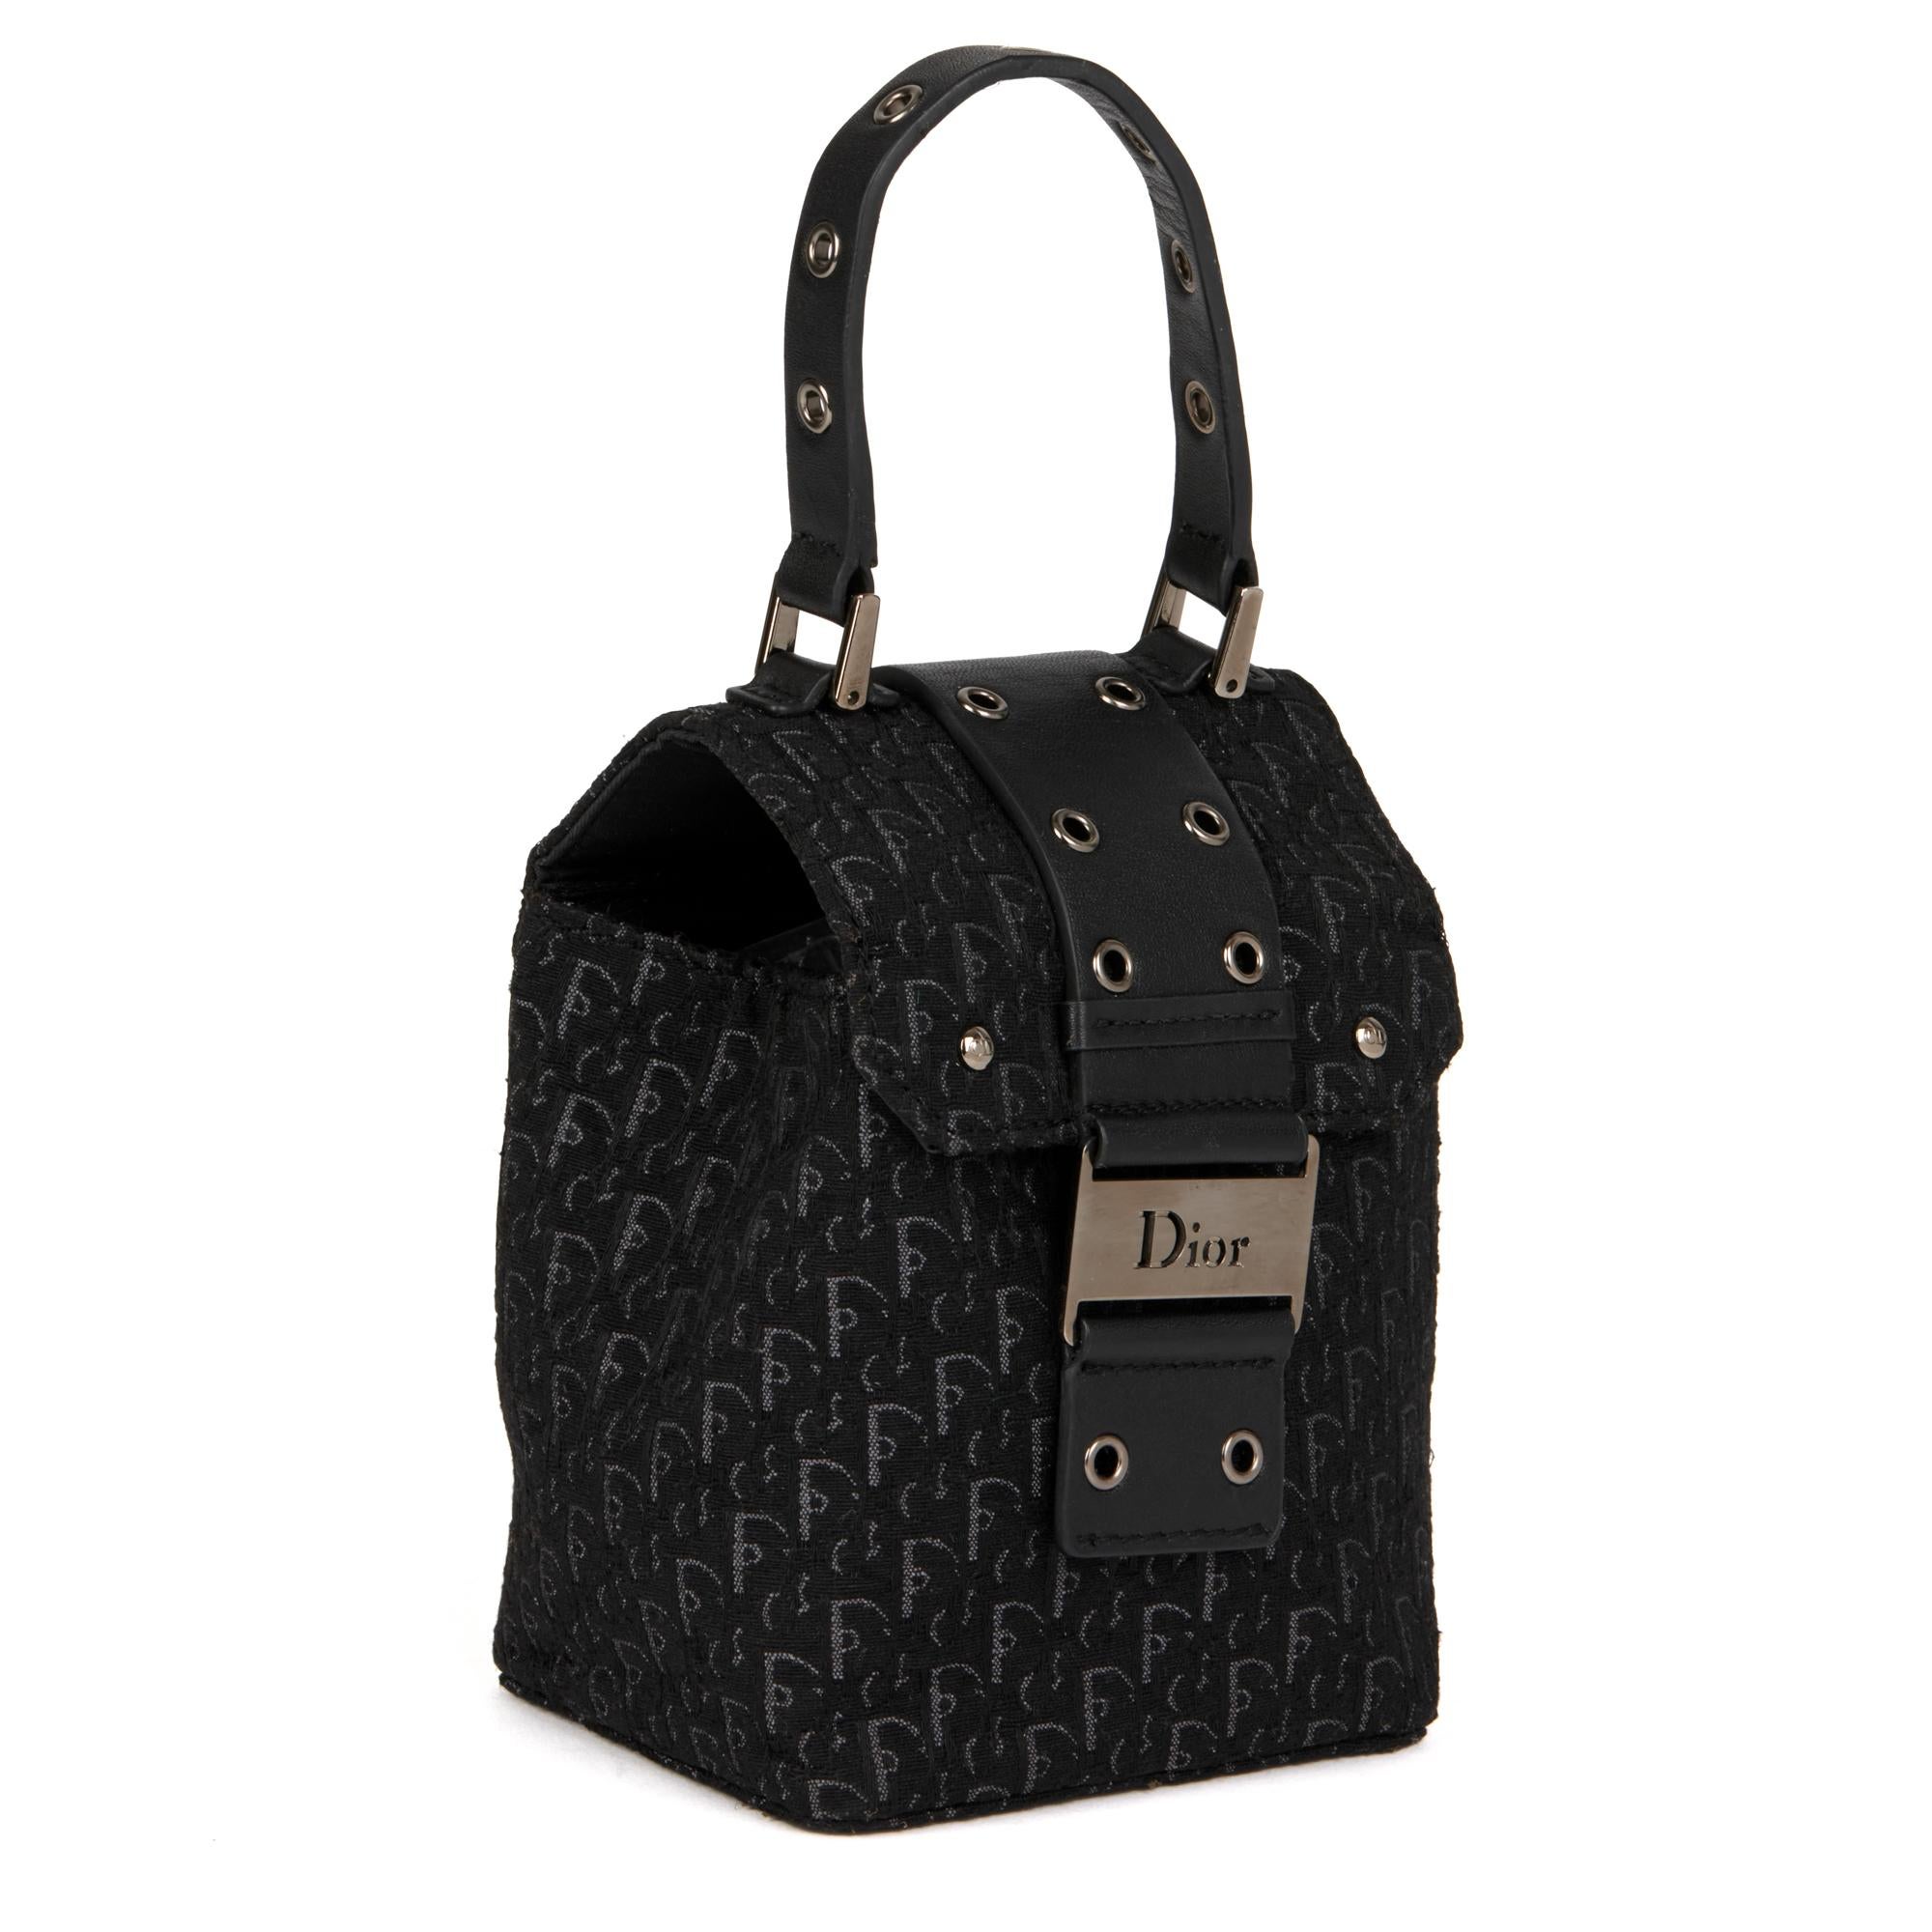 CHRISTIAN DIOR
Black Oblique Monogram Canvas & Calfskin Leather Vintage Top Handle Box Bag

Serial Number: HE0082
Age (Circa): 2002
Authenticity Details: Serial Stamp (Made in Italy)
Gender: Ladies
Type: Top Handle

Colour: Black
Hardware: